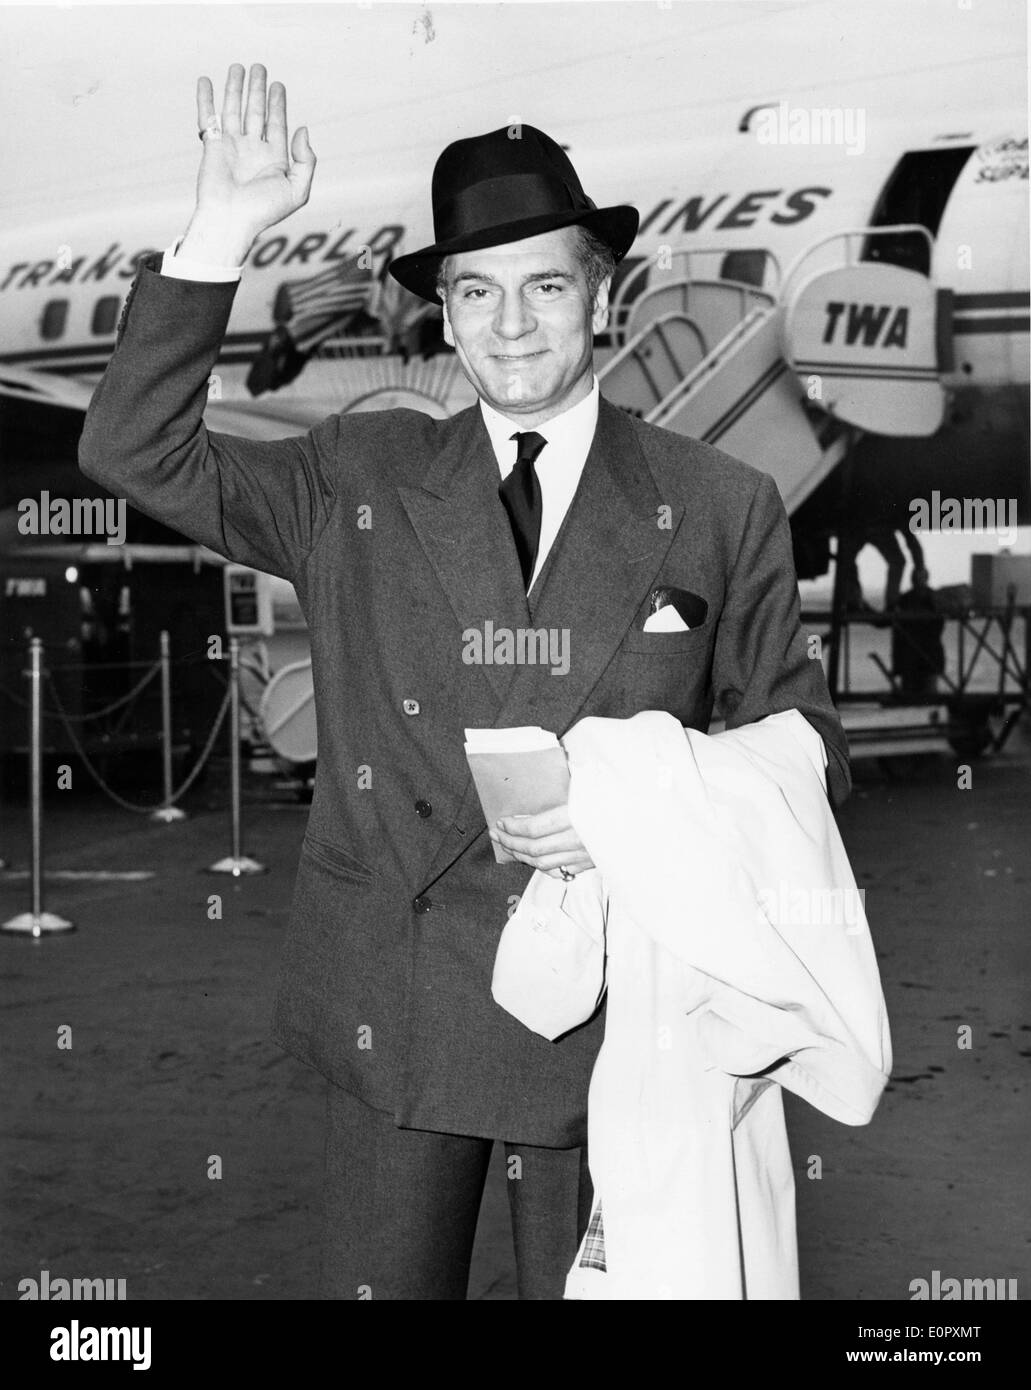 Actor Laurence Olivier boarding a TWA Jet stream Stock Photo